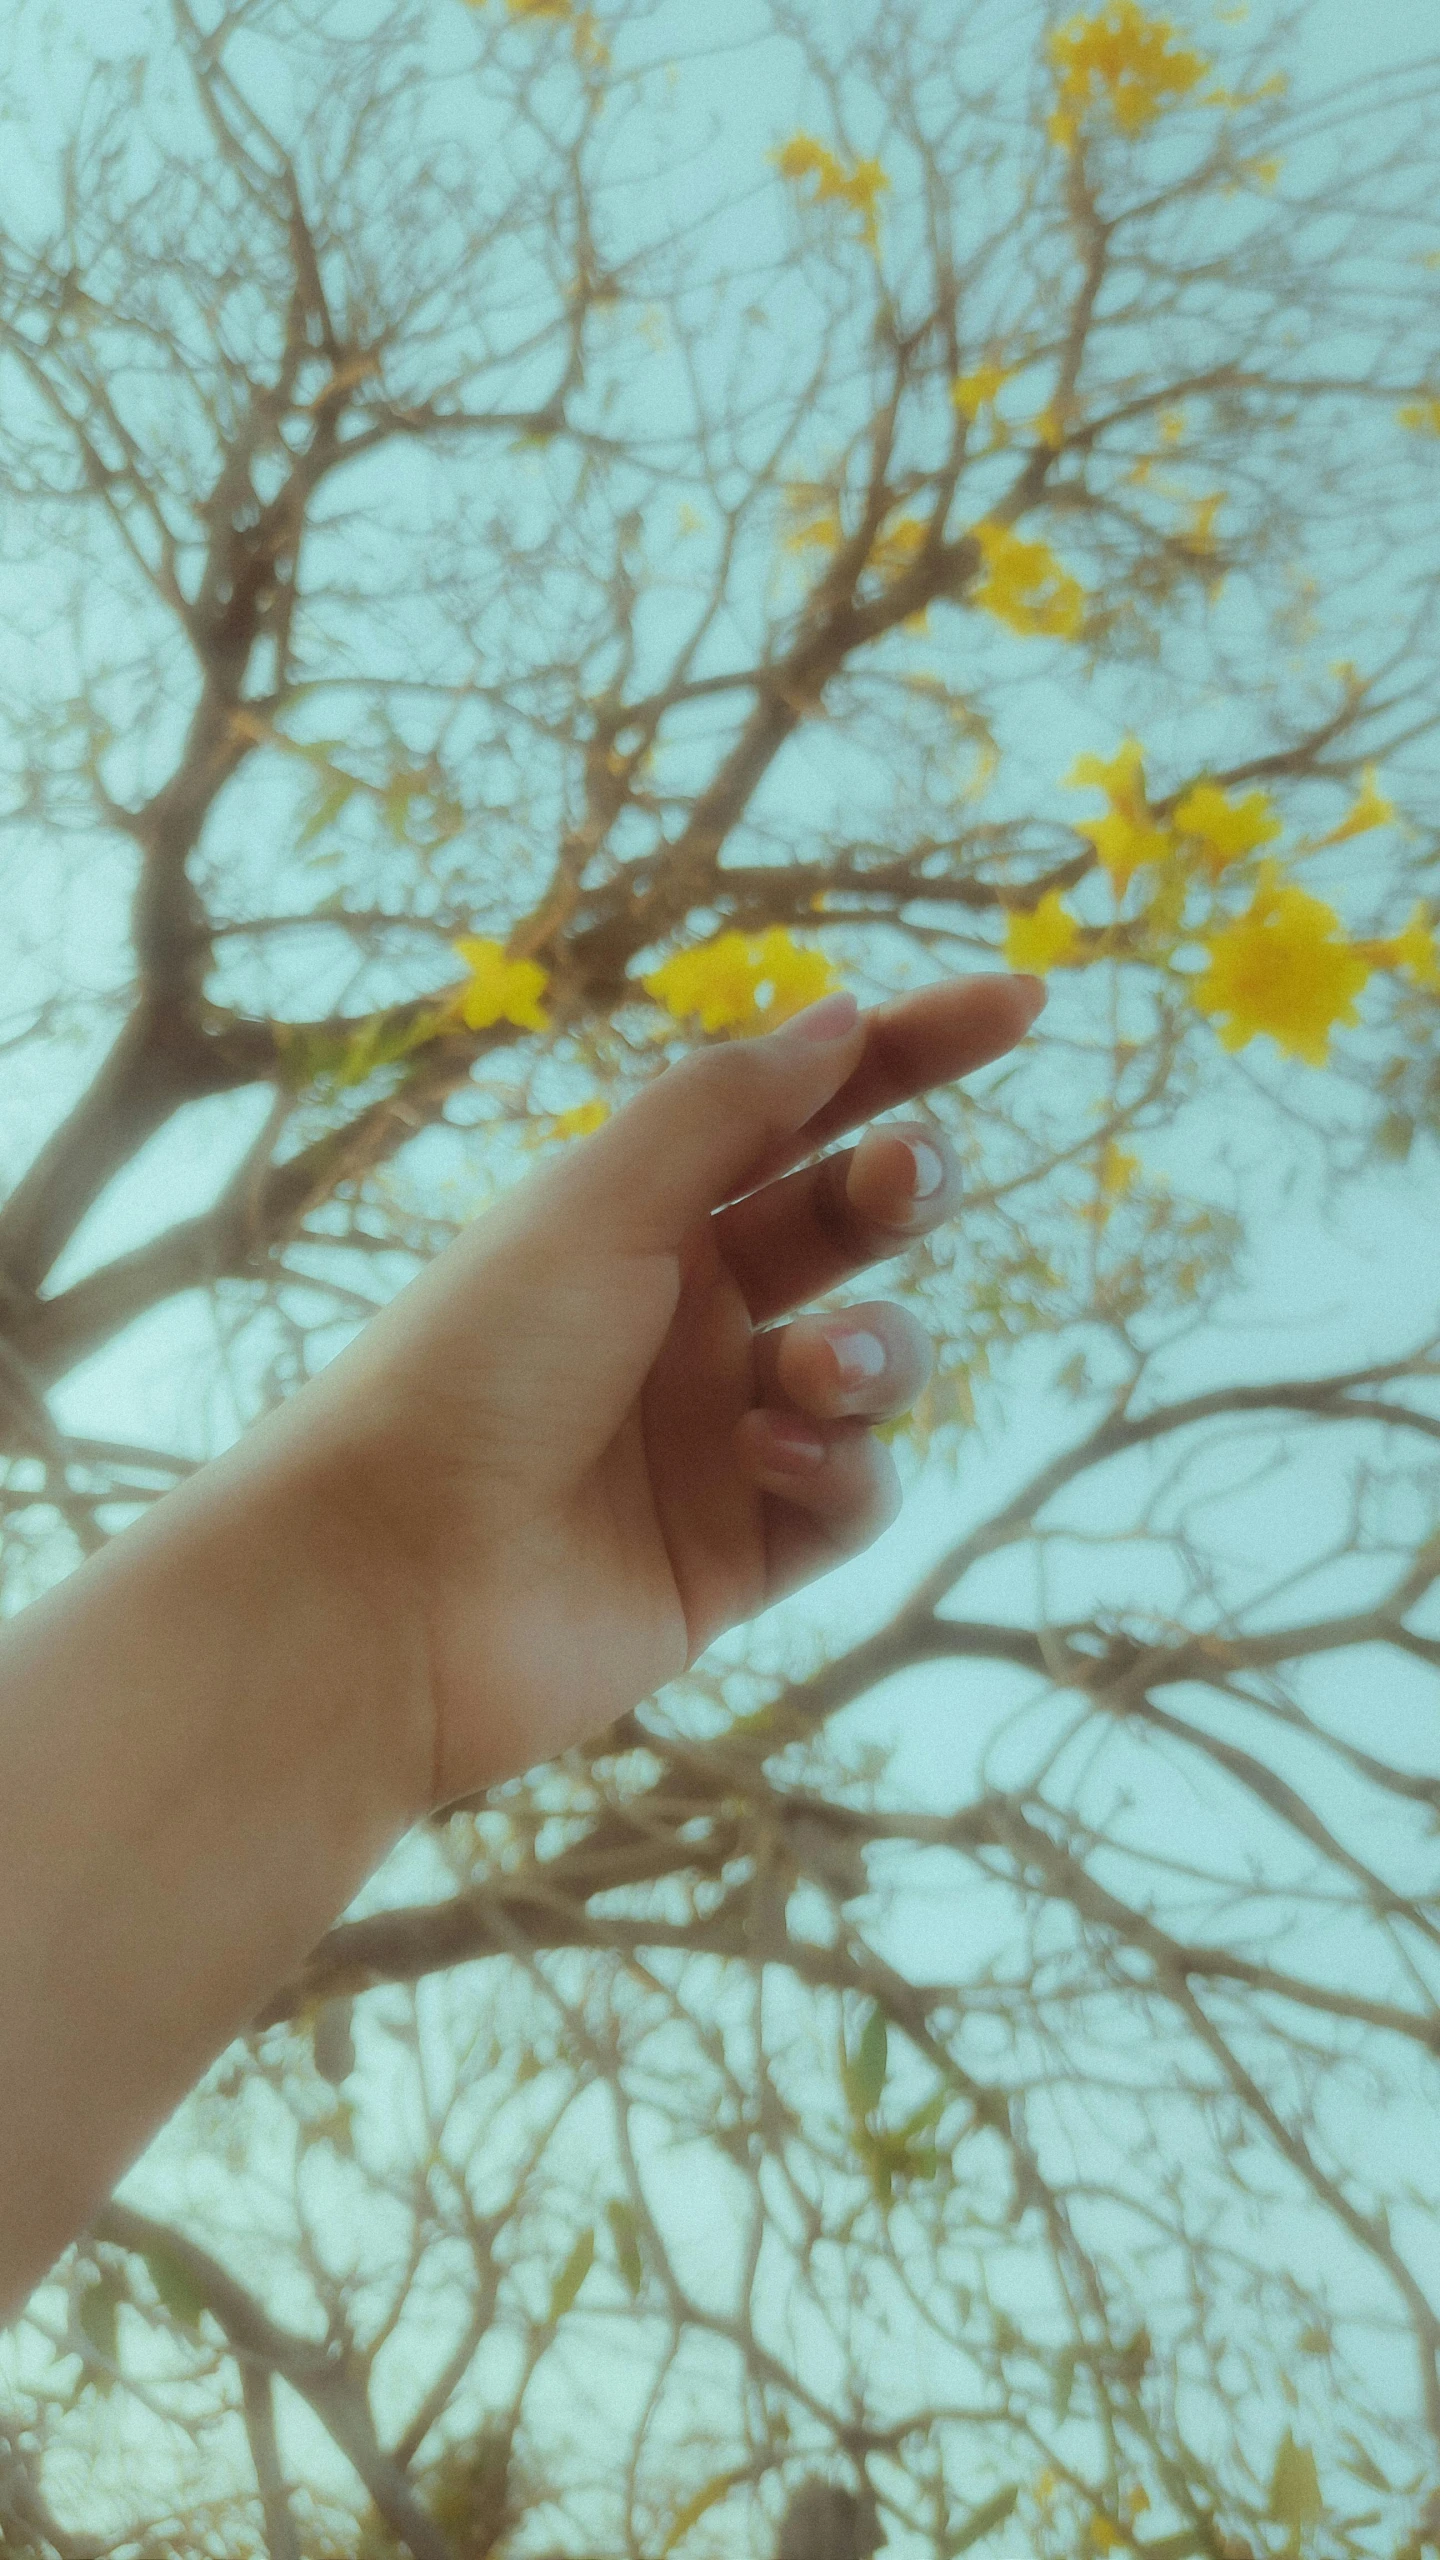 a tree with yellow flowers and someone's hand